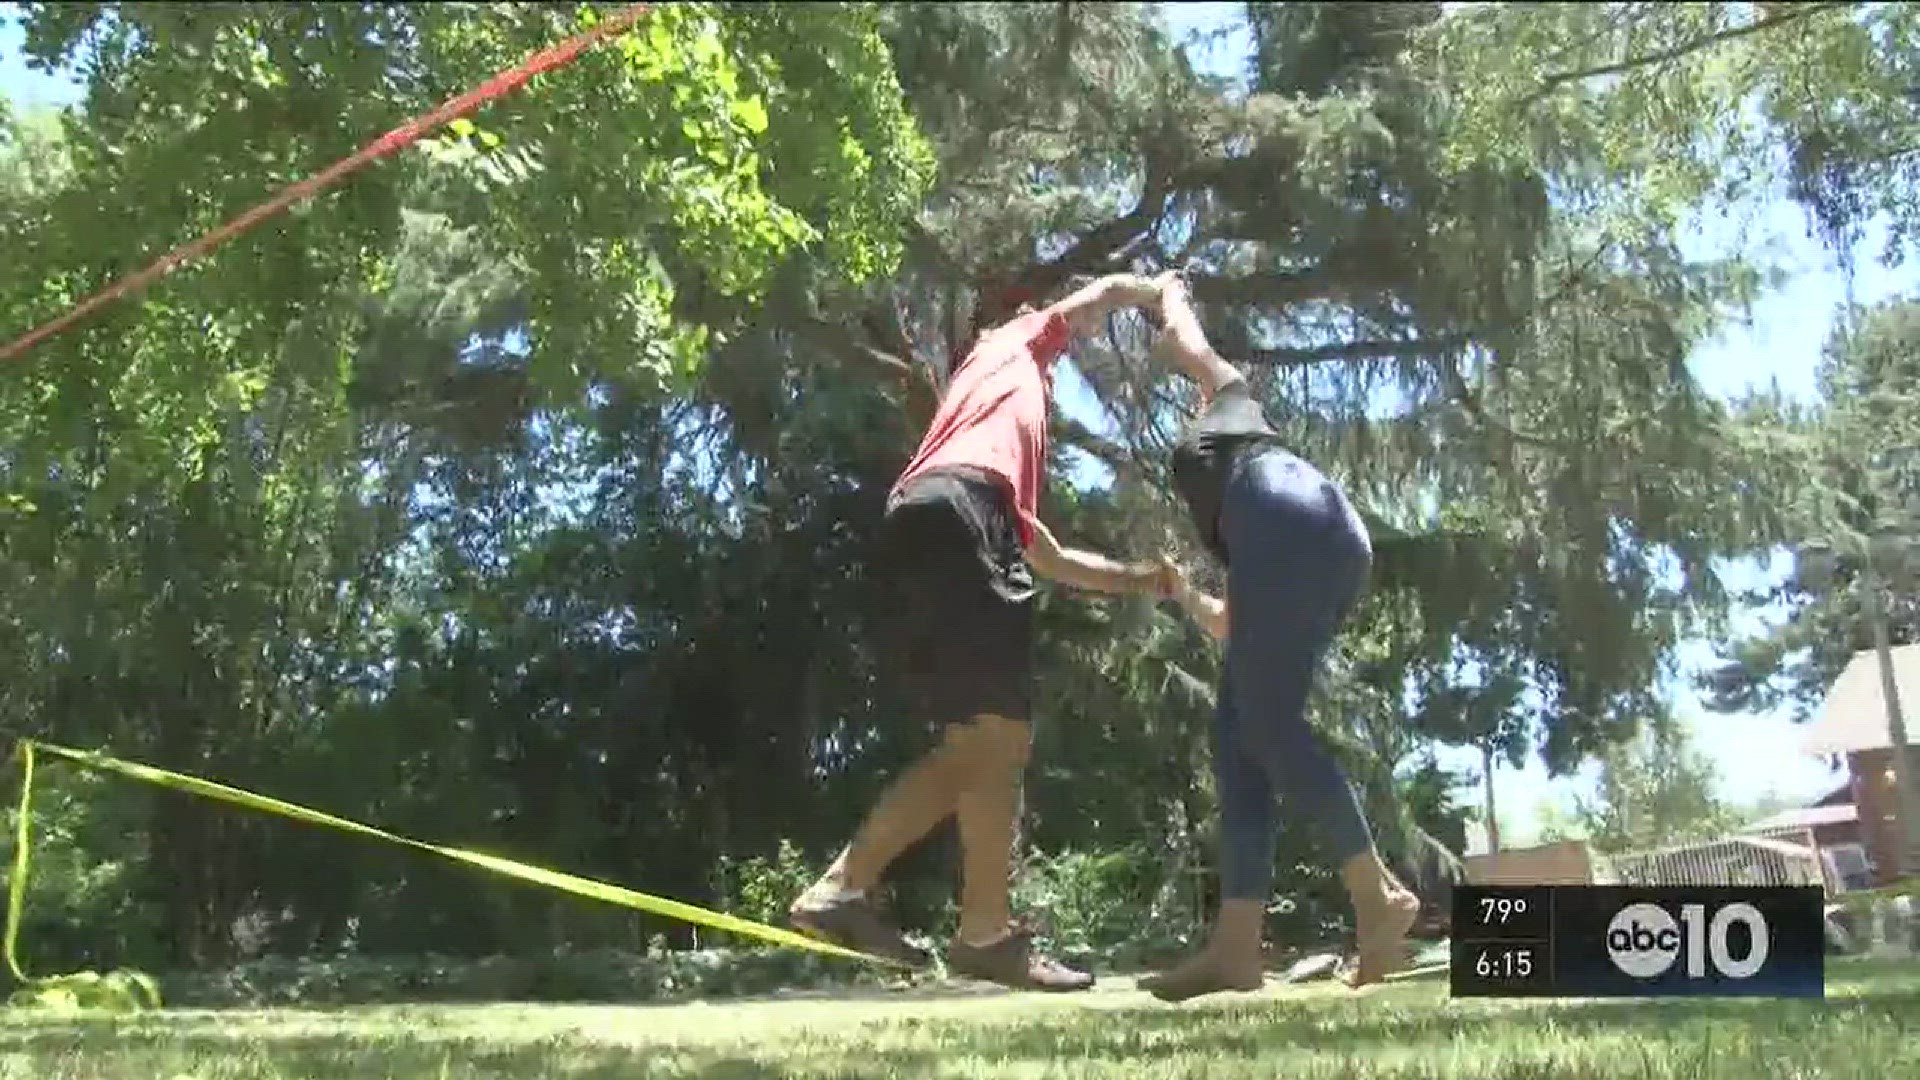 Lodi couple falls in love while slack lining. (July 7, 2016)